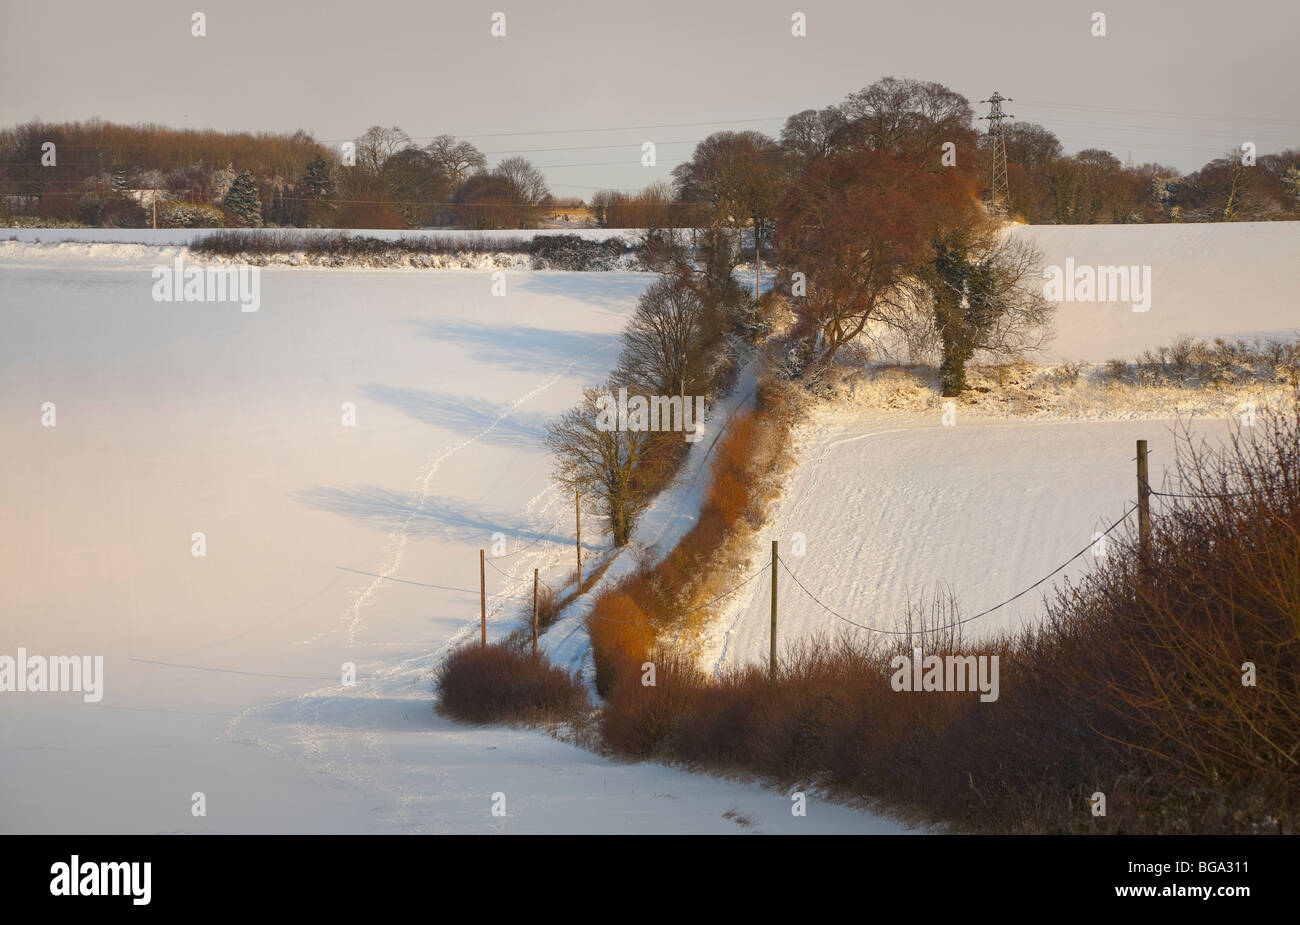 Rural snow lanscape, Bedfordshire, tree lined country lane, warm summer sun casting low shadows on snow. Stock Photo